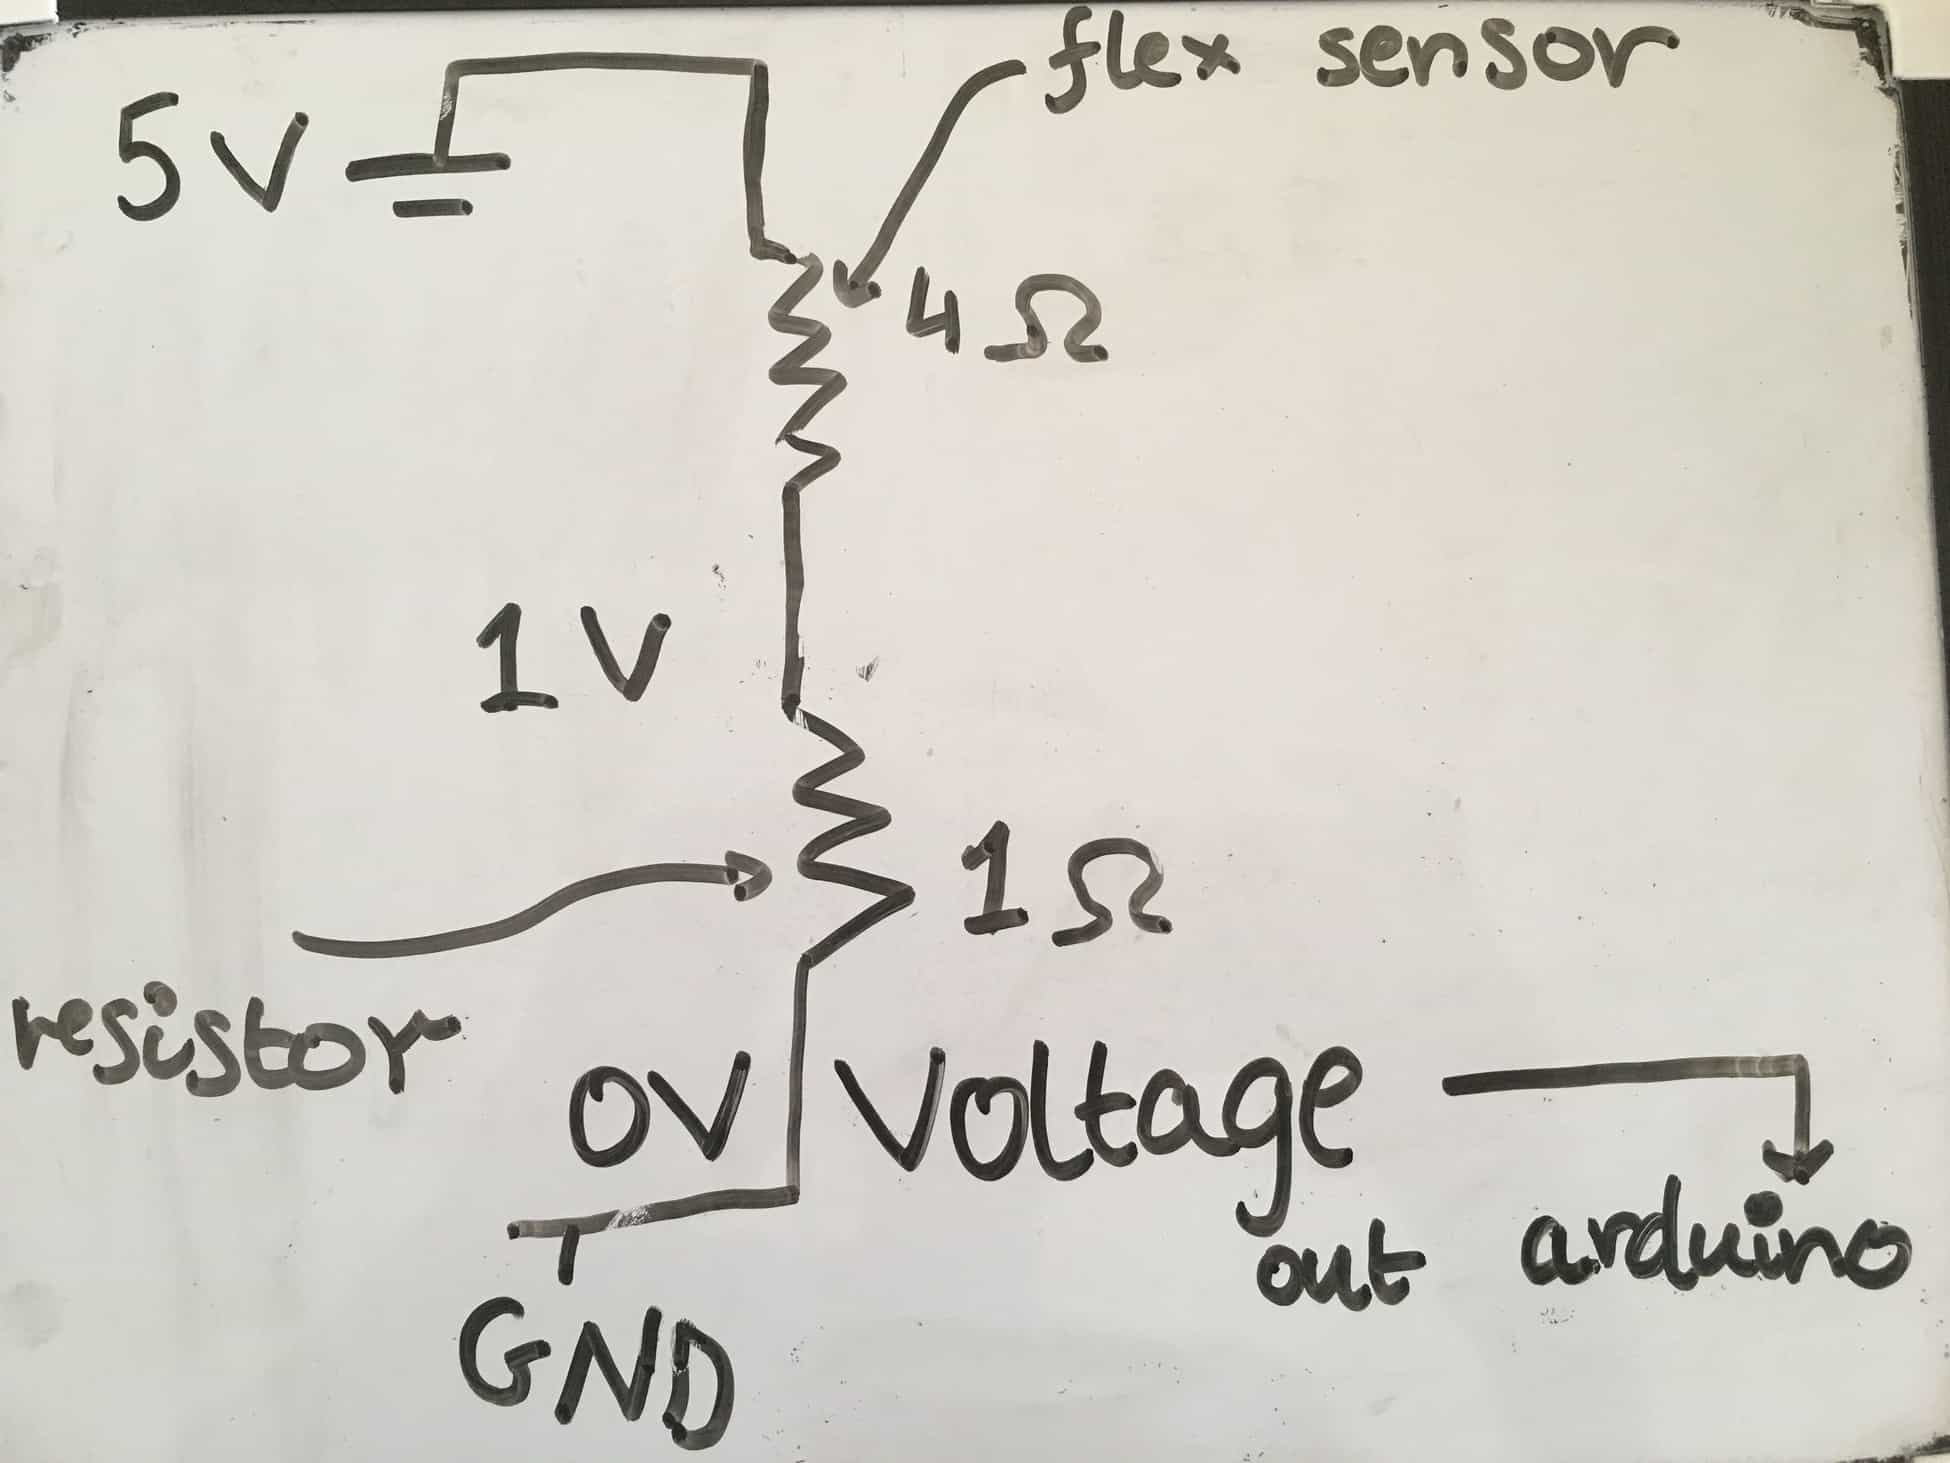 WRONG WAY OF READING VOLTAGE(ARDUINO WIRE AFTER BOTH RESISTORS. VOLTAGE WILL ALWAYS BE 0)